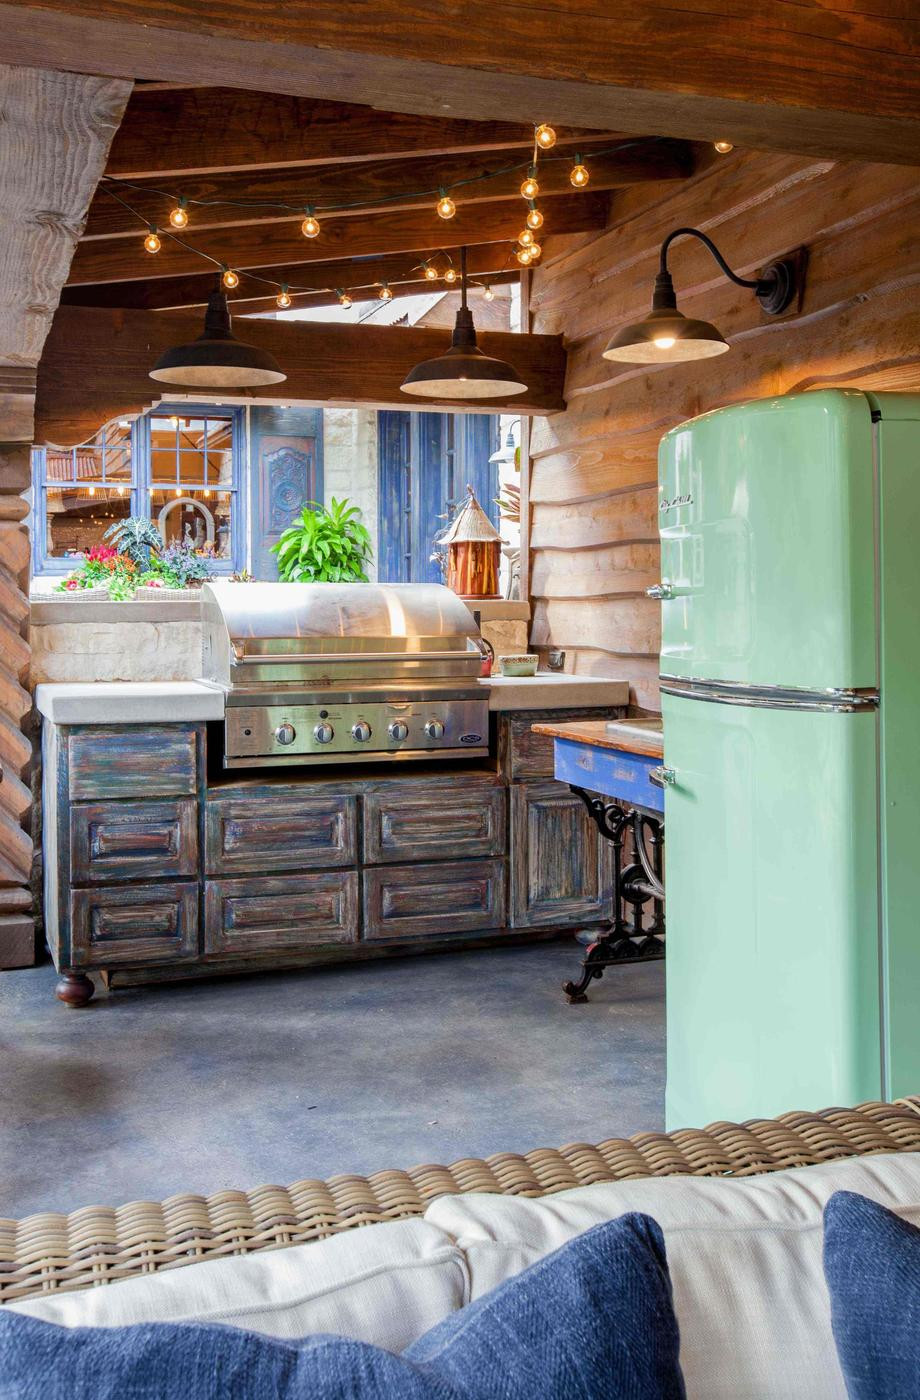 Outdoor Kitchen Fridge
 Help customers pondering outdoor kitchens stand out